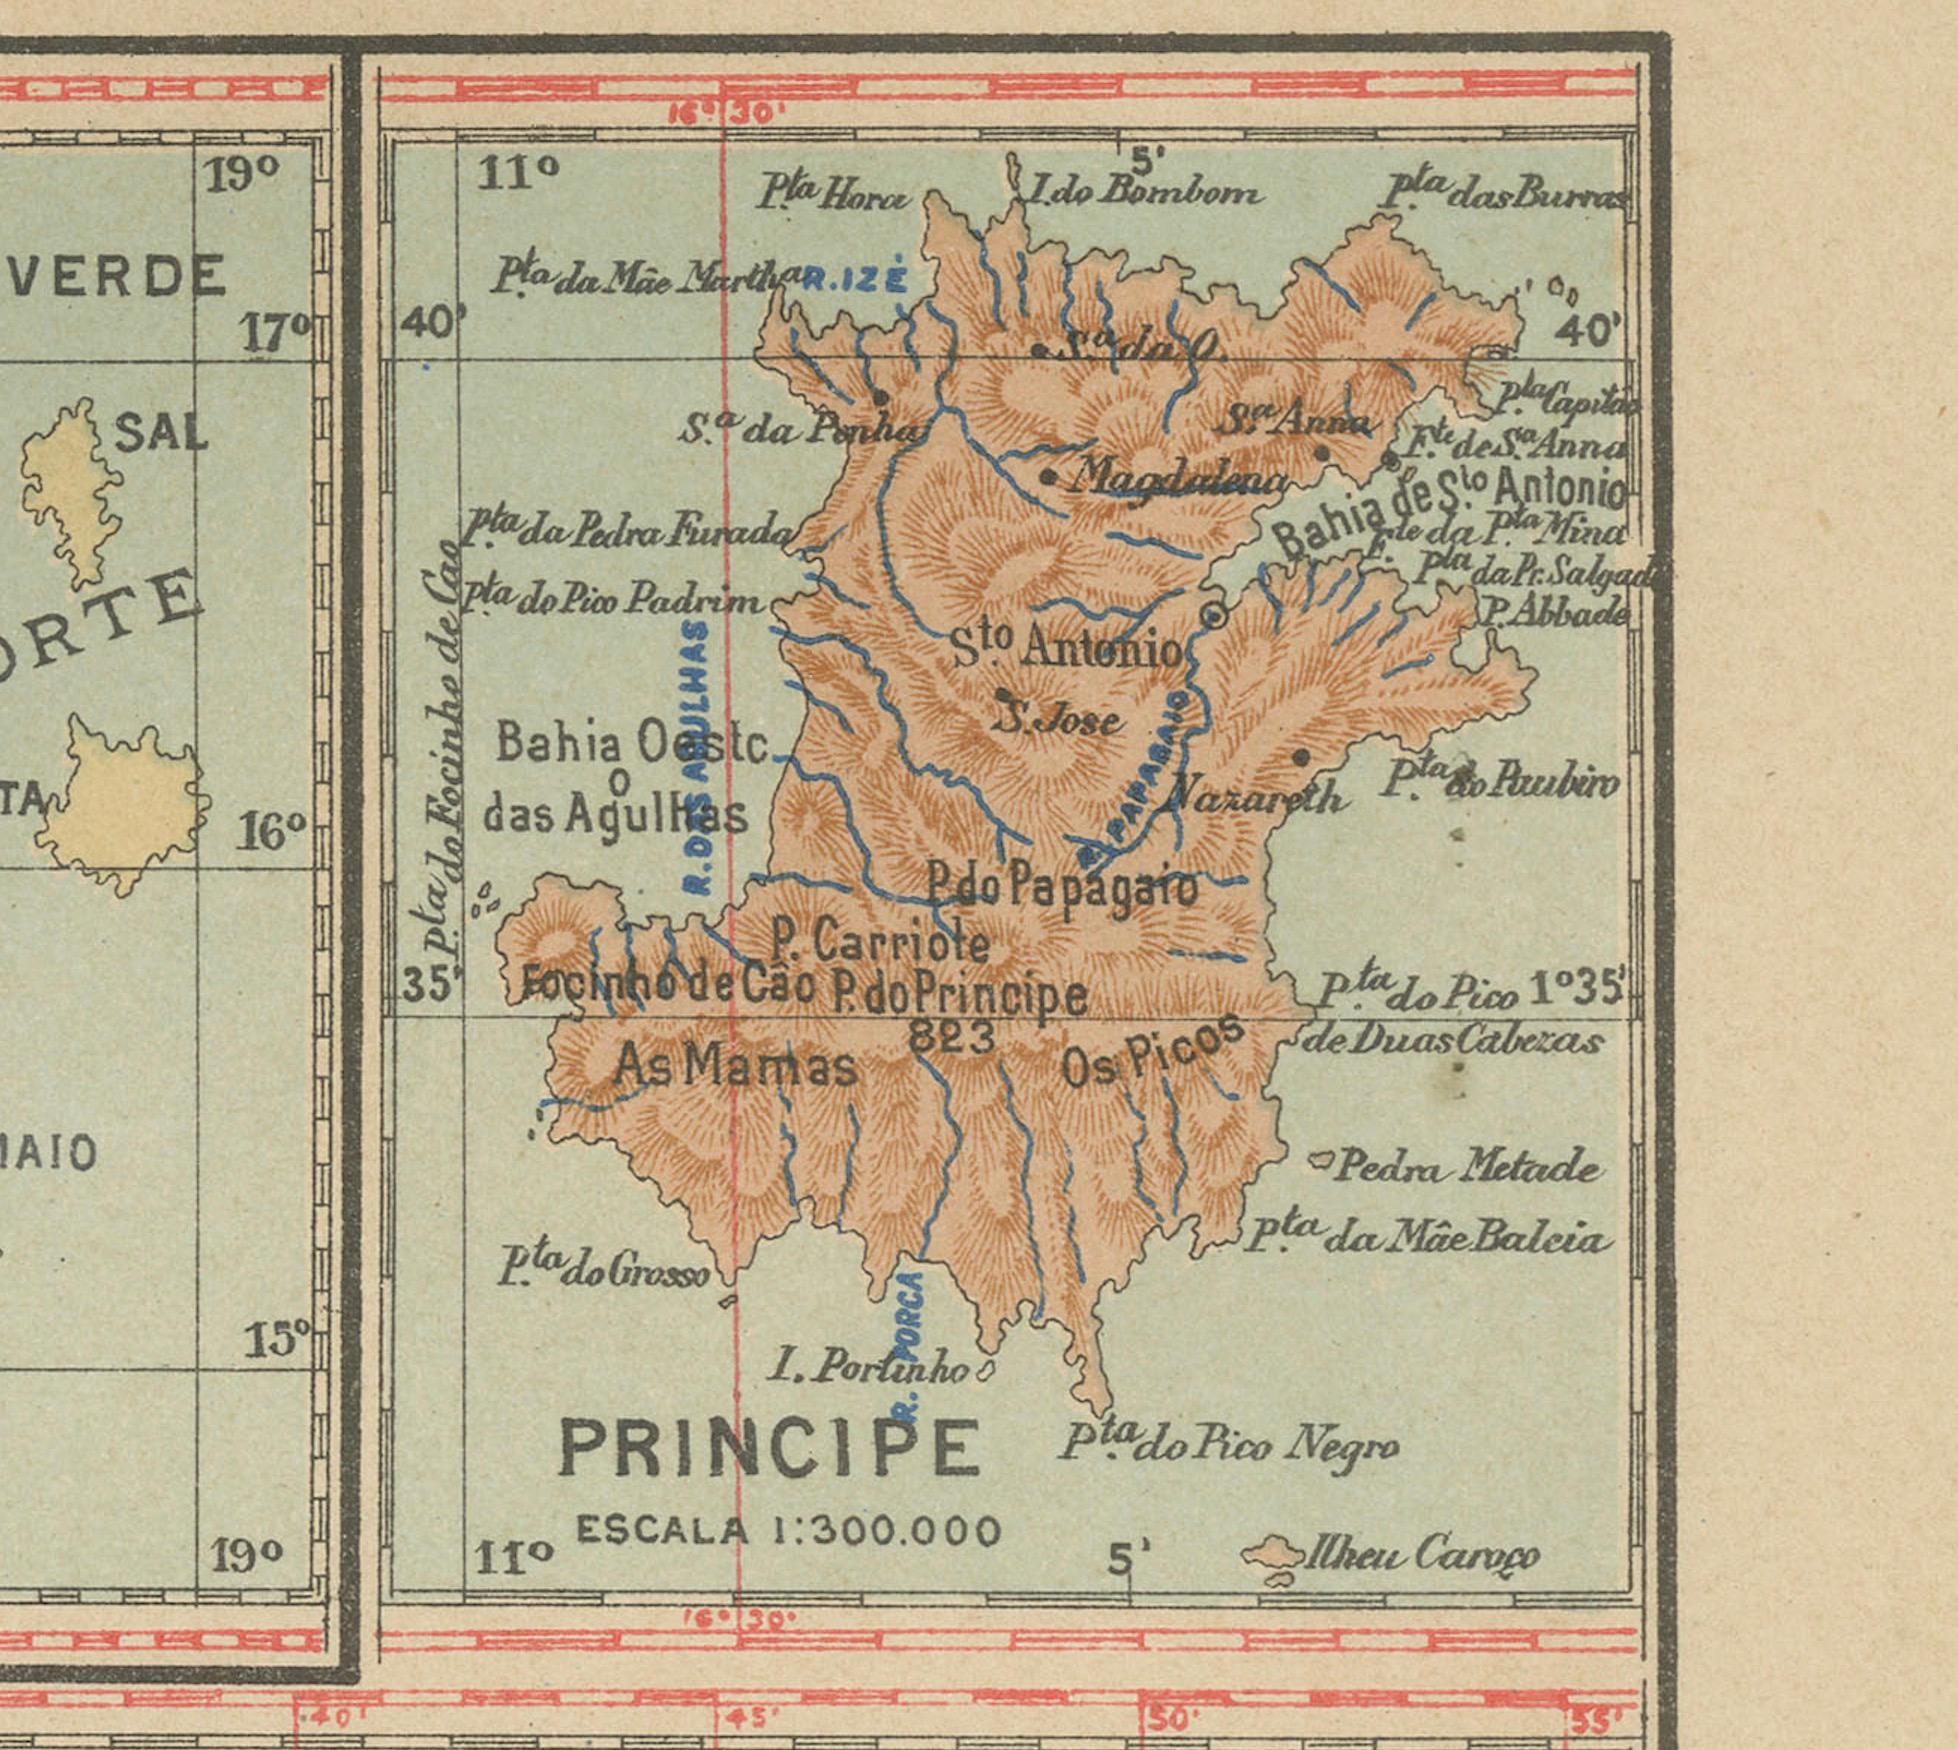 The image is an original historical map from 1903 depicting Portuguese possessions in the Atlantic Ocean, specifically the islands of Cape Verde and the islands of São Tomé and Príncipe. The map is divided into multiple panels, each showing a